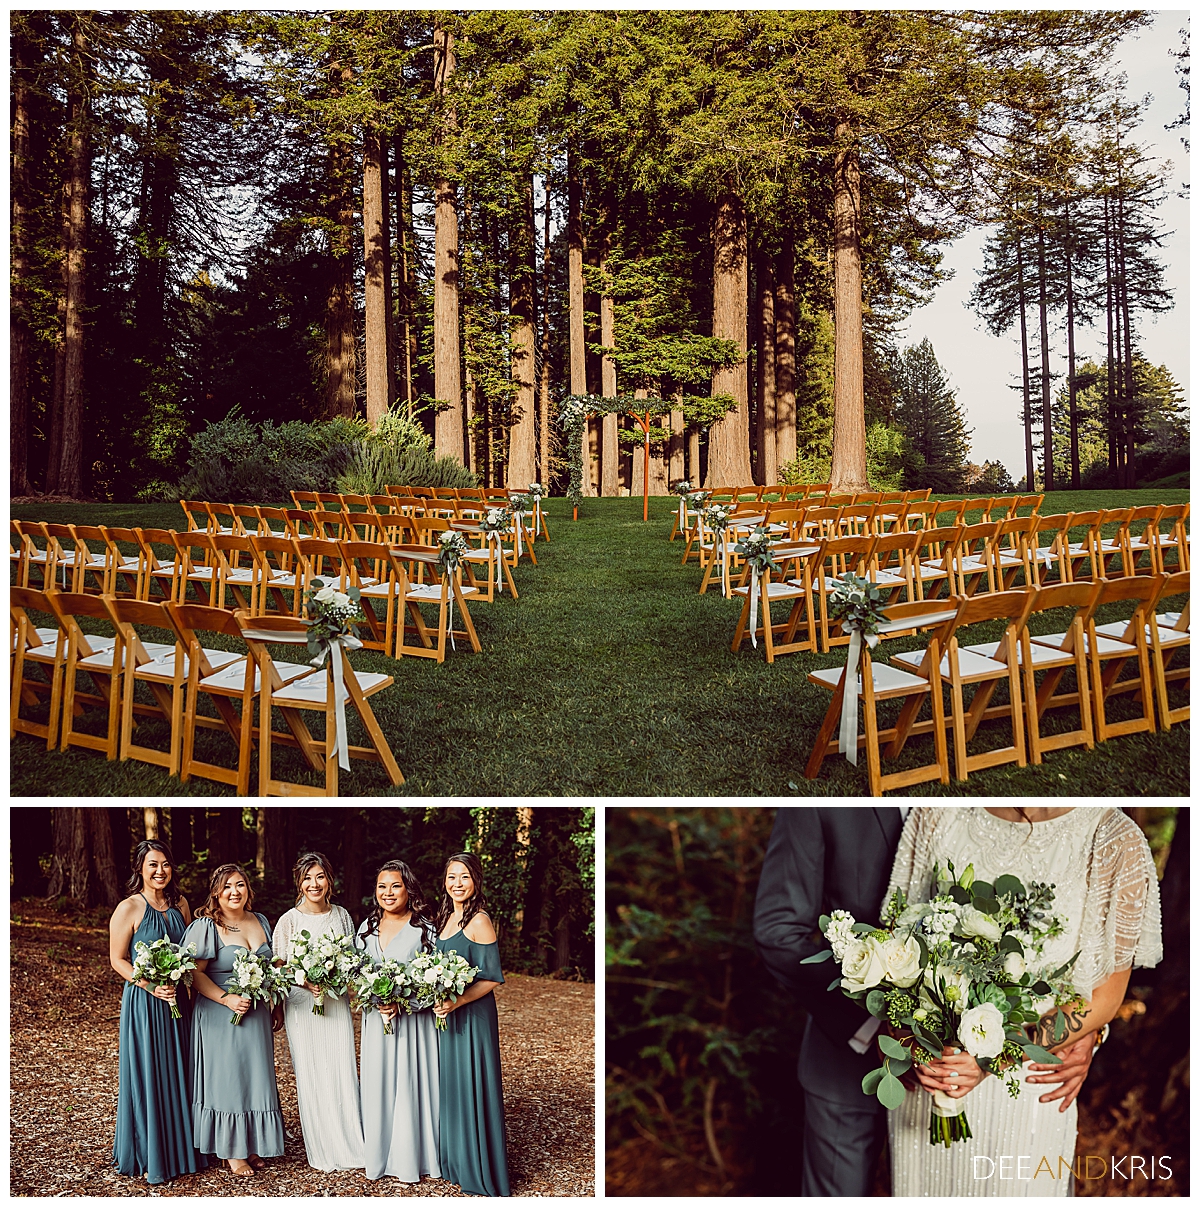 Three images: Top image of venue lawn with redwood trees behind it. Left bottom image of bride and bridesmaids holding bouquets. Bottom right image of bride's bouquet for Tie The Knot: Dream Wedding Guide blog post.